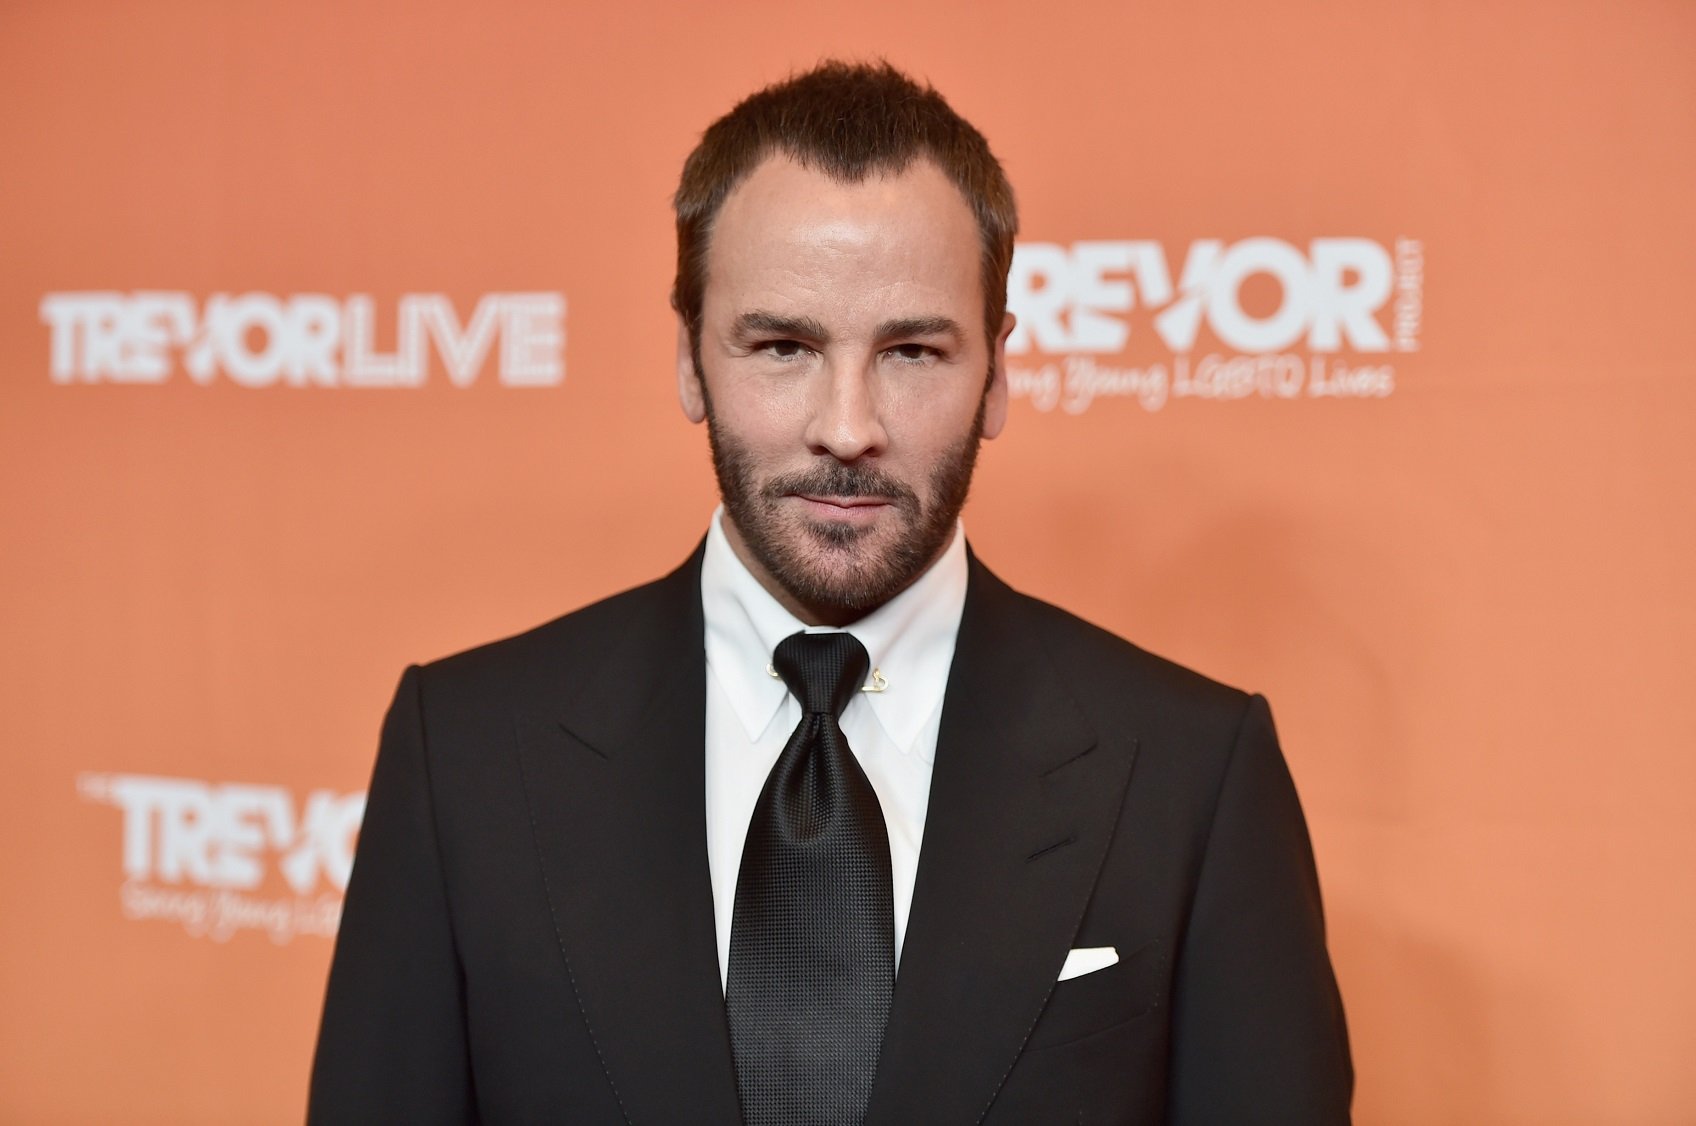 Tom Ford - Age, Net Worth, Height, Bio, Career, Married, Facts